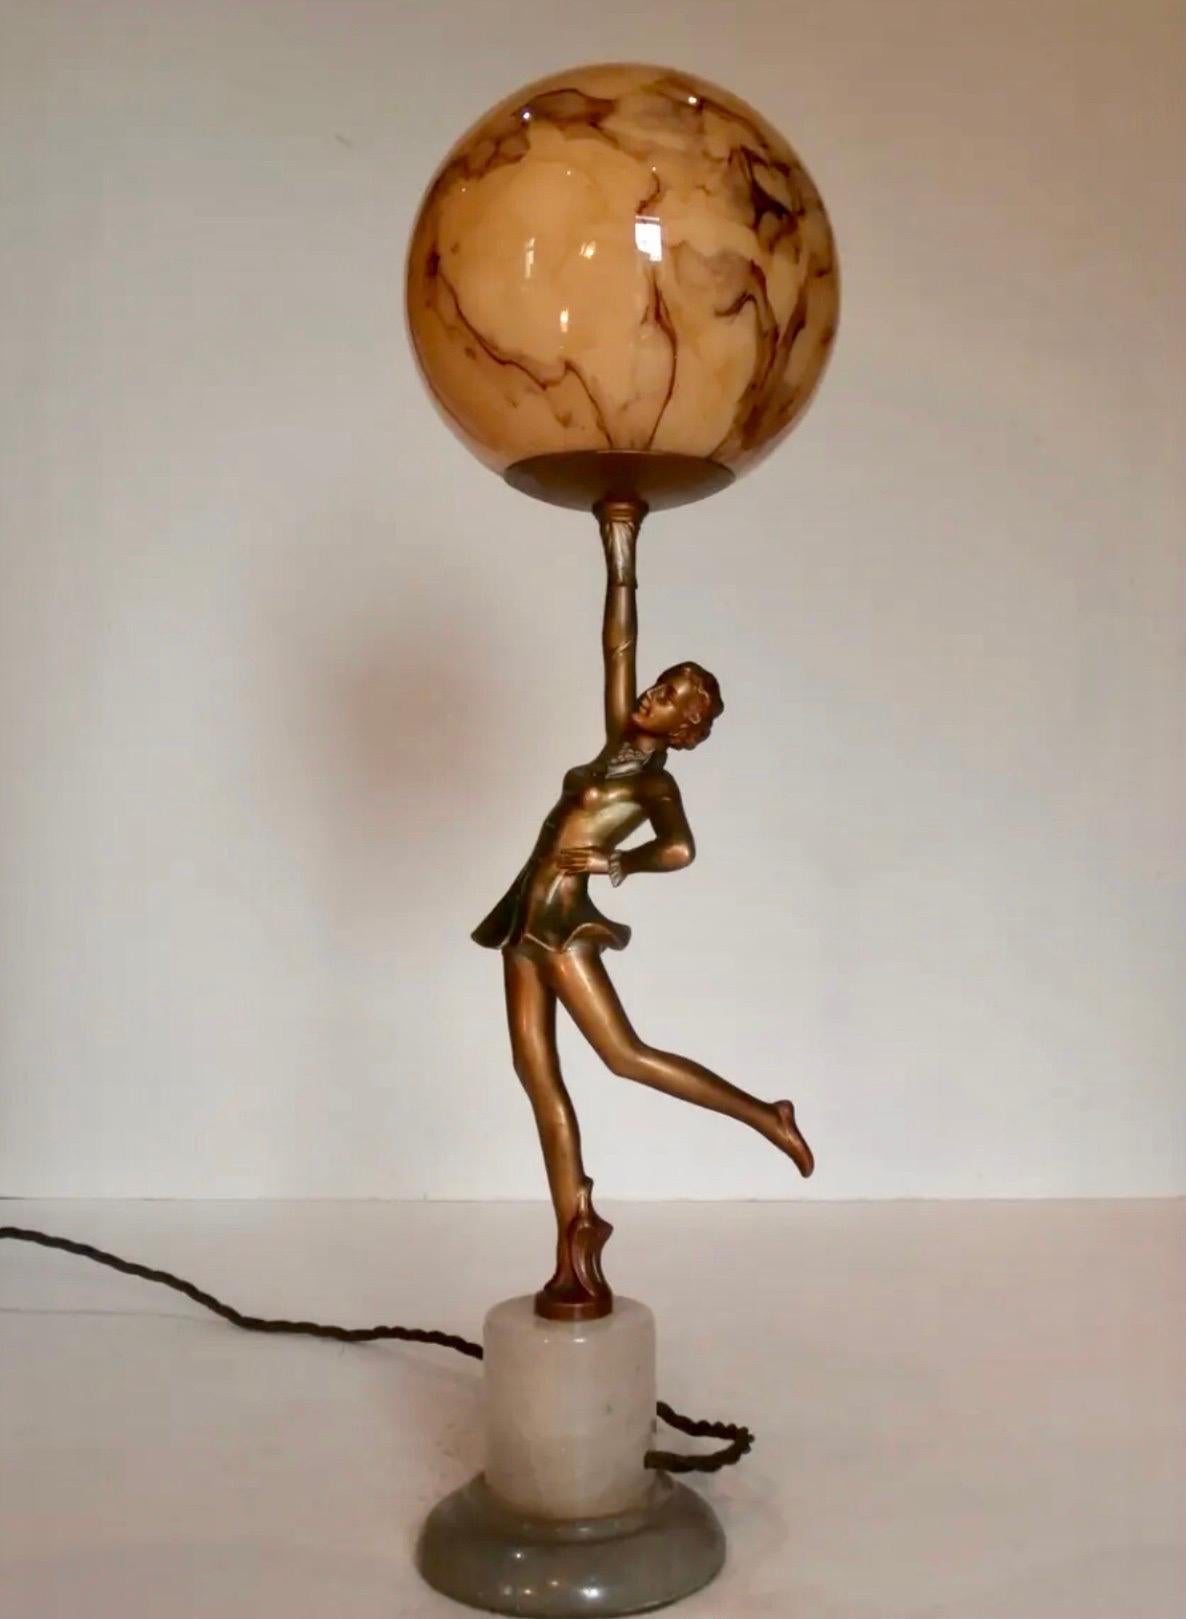 Stunning Fine Art Deco Lady Lamp With Marbled Globe Standing On A Alabaster Circular Base
Circa 1930

20ins x 6ins x 6ins